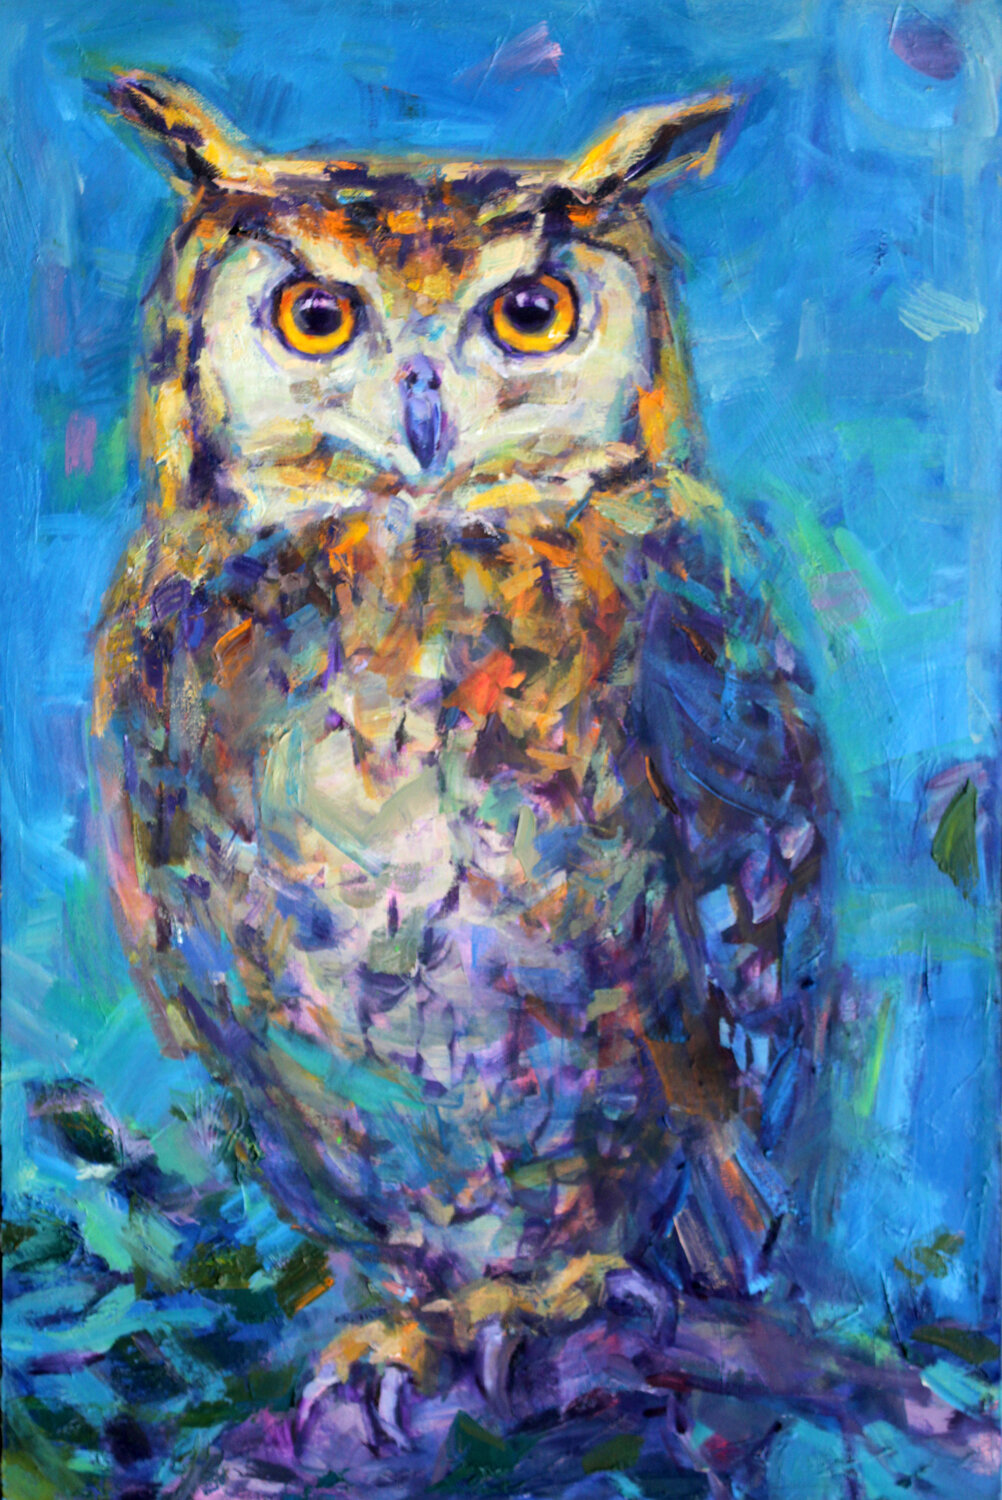  “Horned Owl”,                                                                          36x24 inches,                                                                                  oil on canvas,                                                     